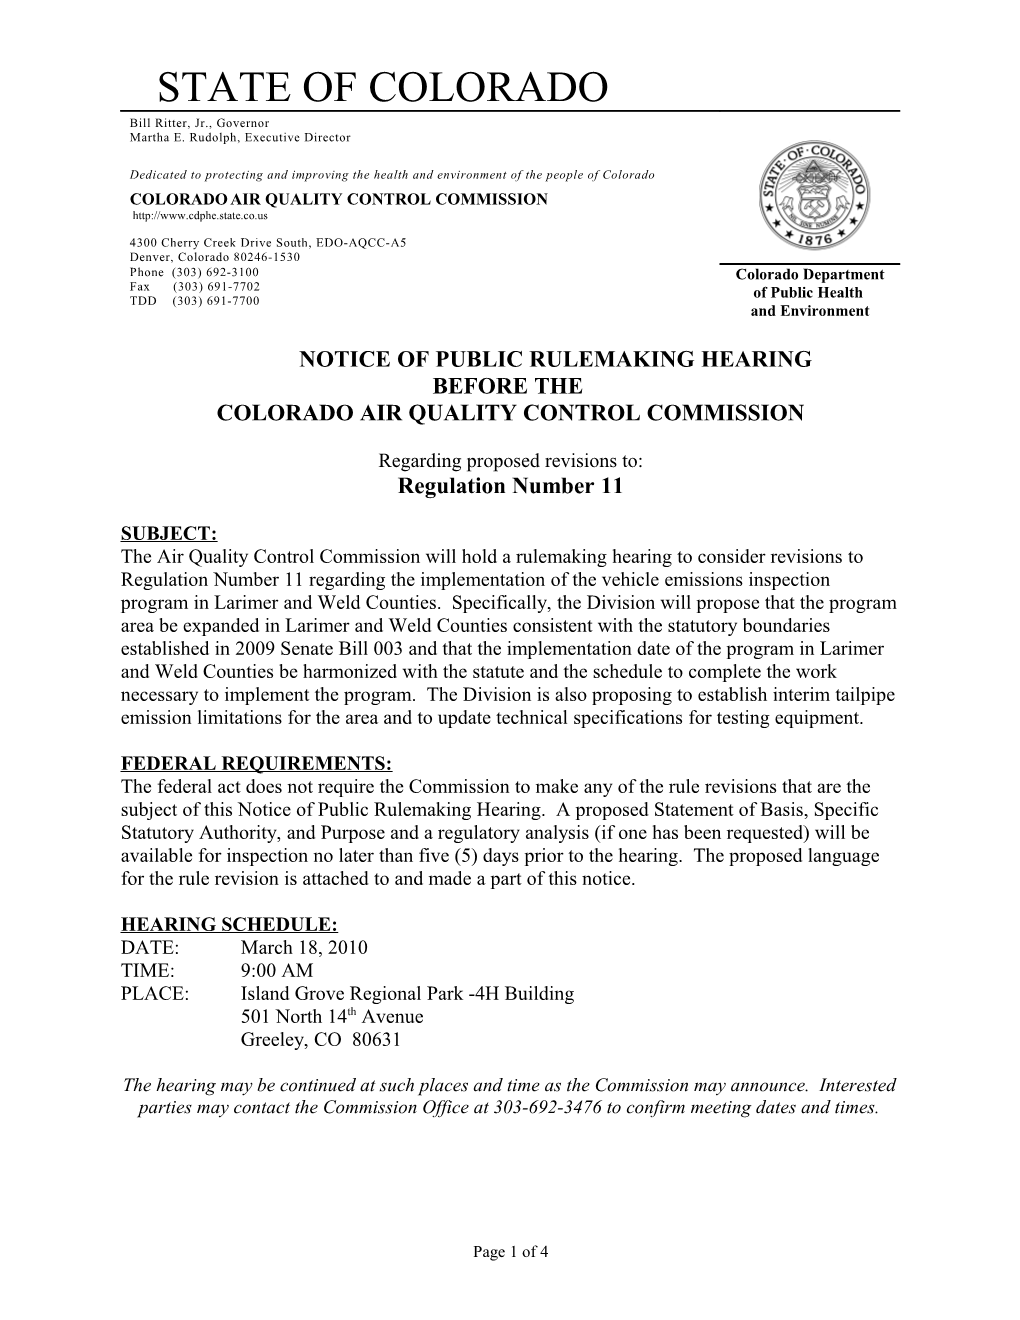 Notice of Public Rulemaking Hearing s1